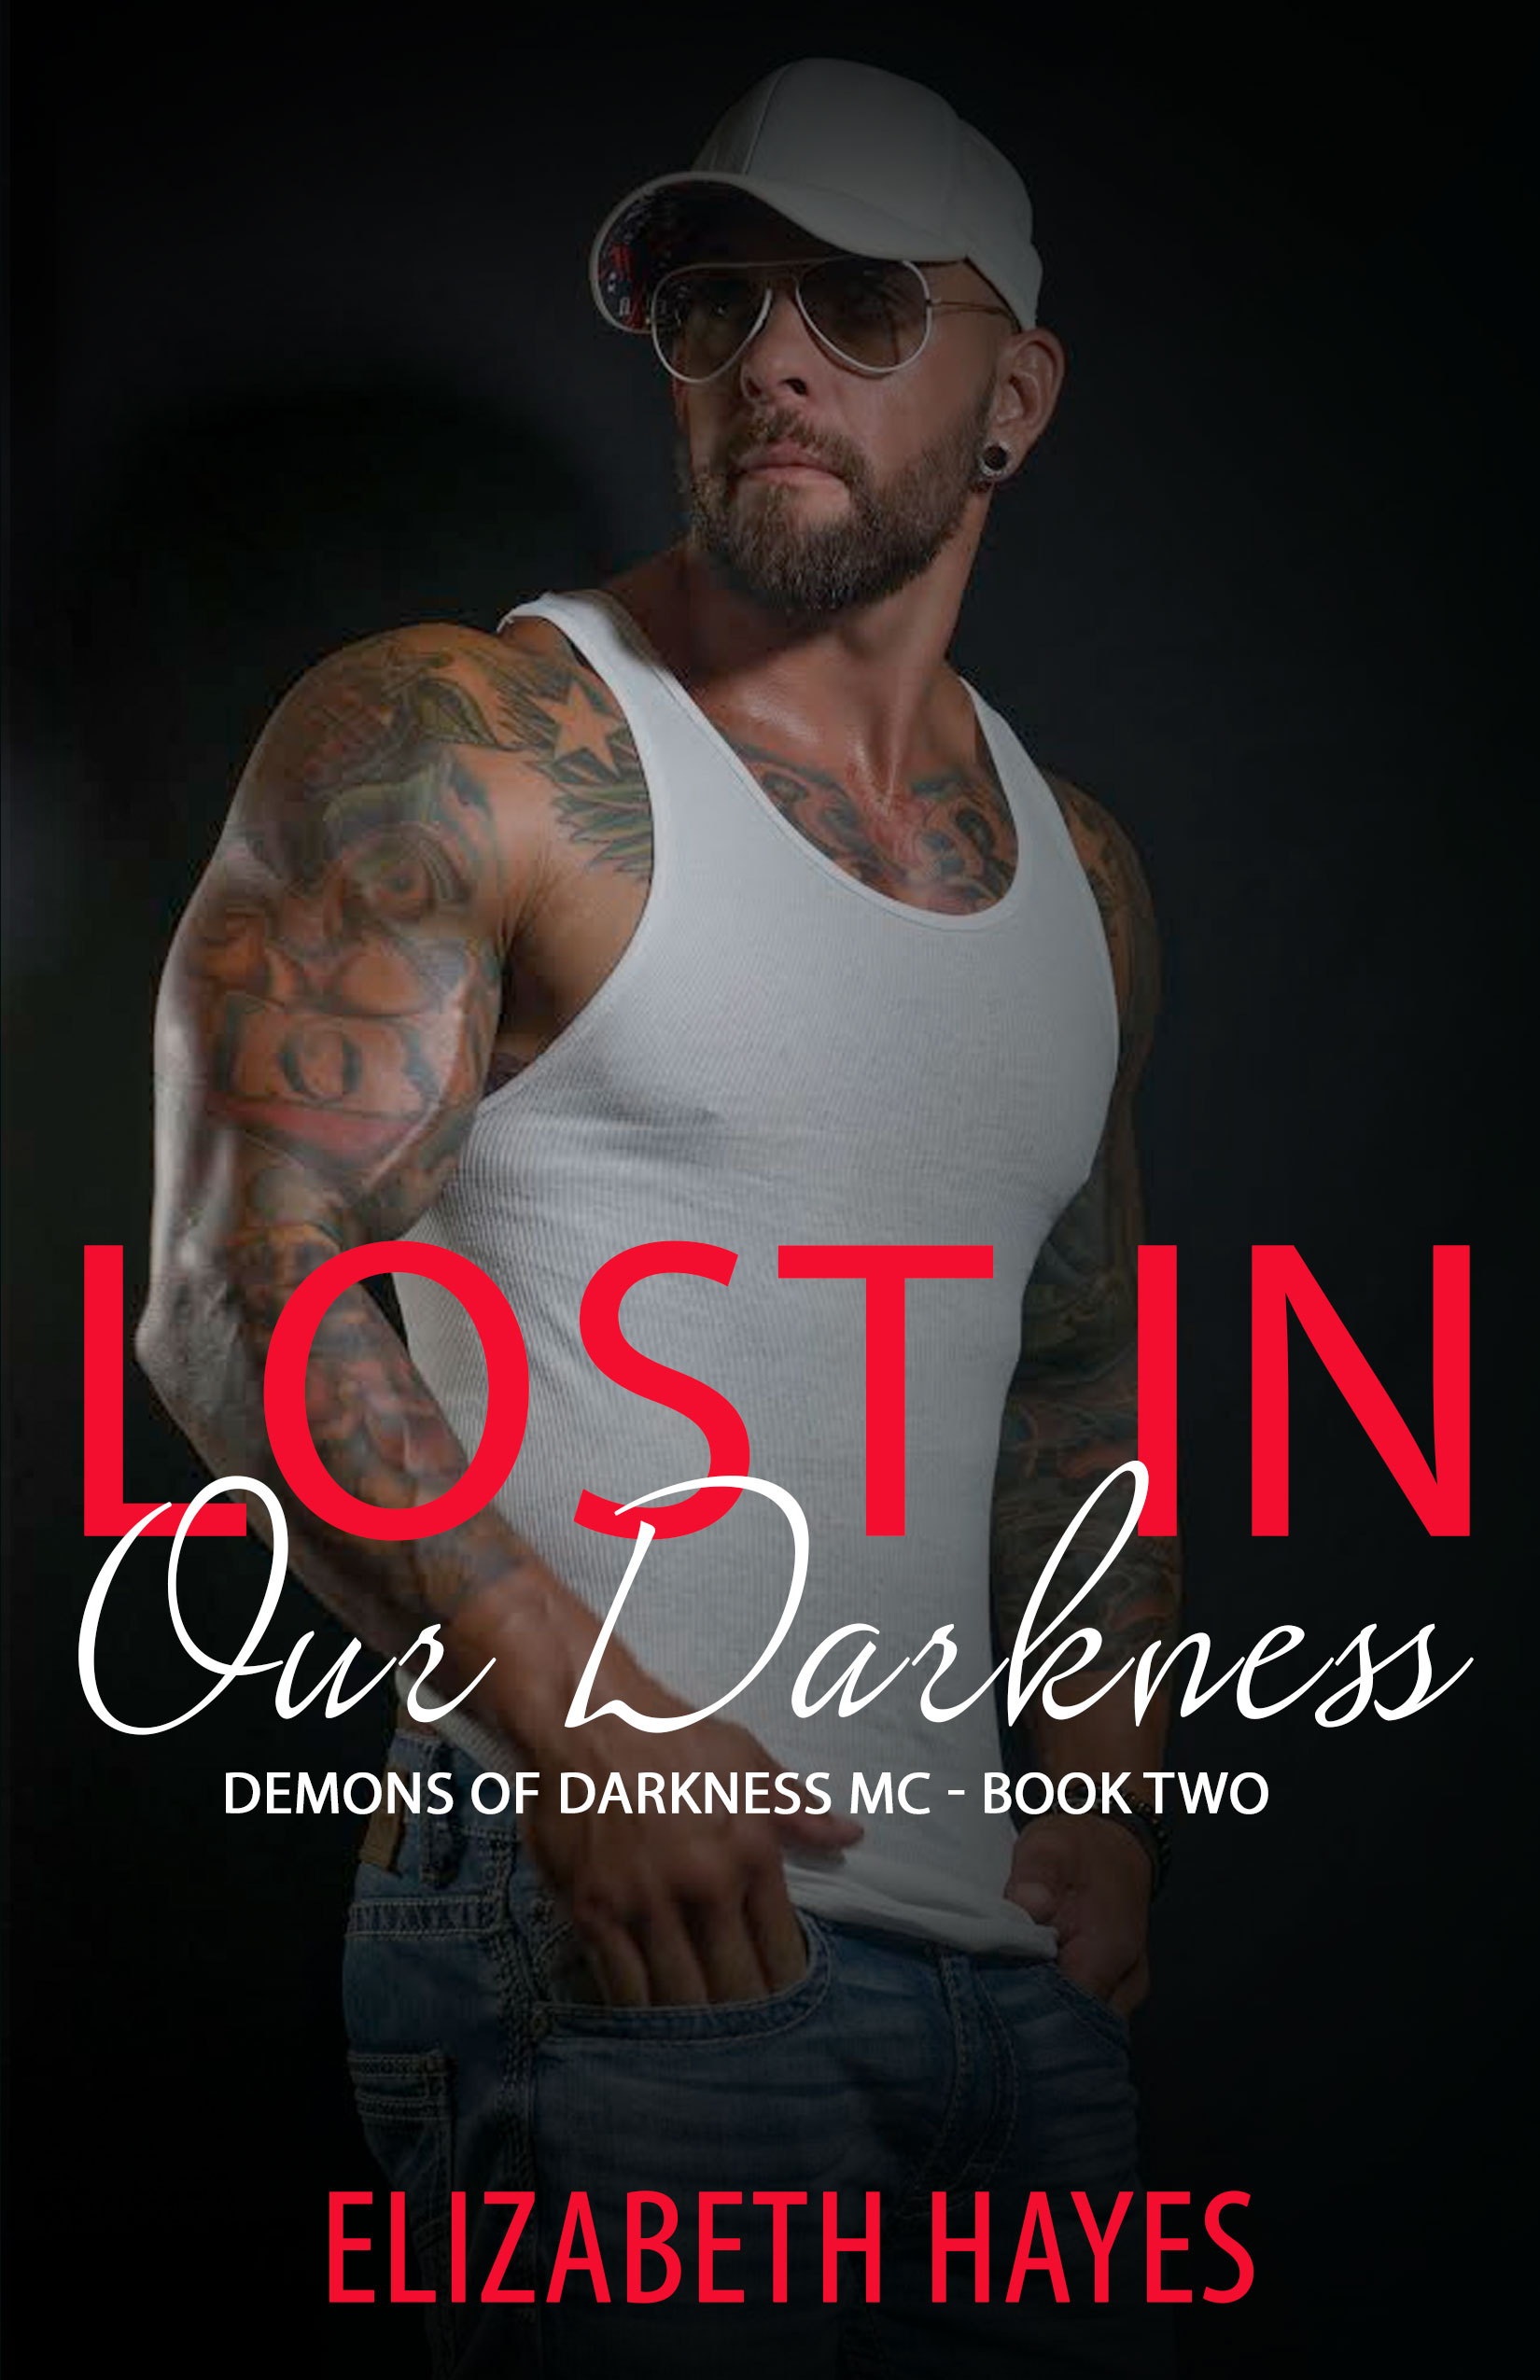 Lost in Our Darkness by Elizabeth Hayes Release Review + Giveaway